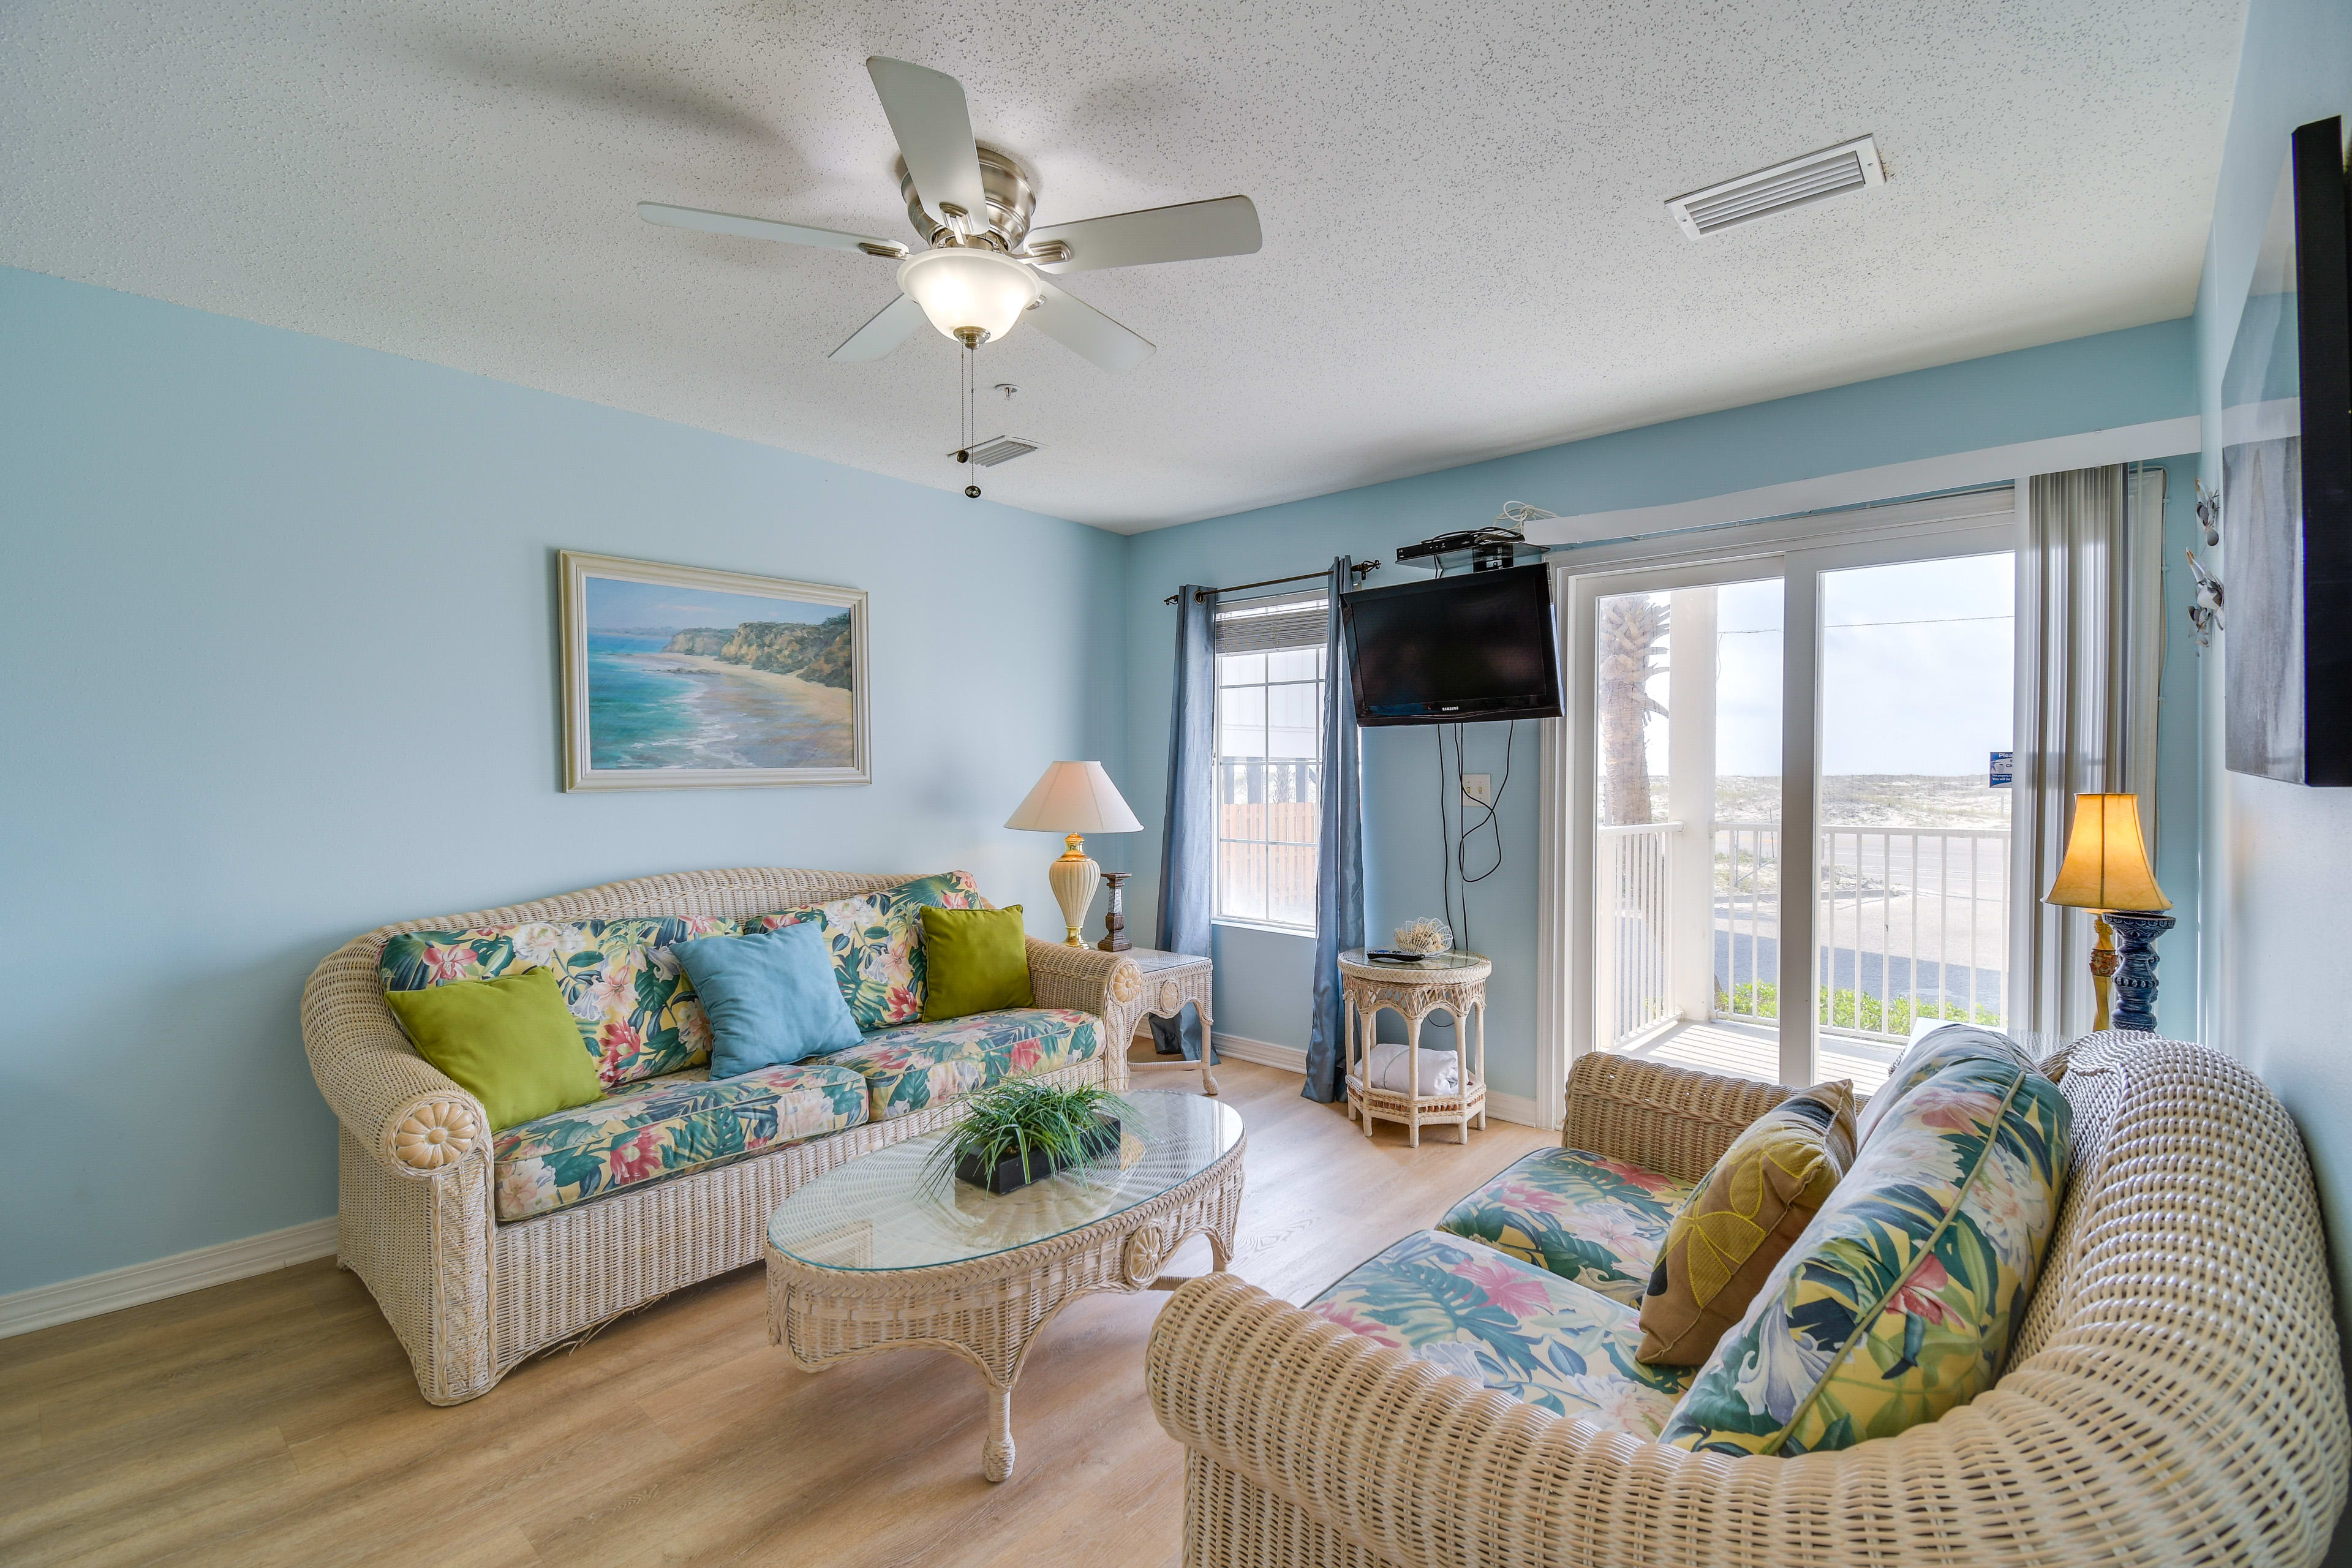 Gulf Shores Vacation Rental | 3BR | 2BA | 1,008 Sq Ft | Stairs Required